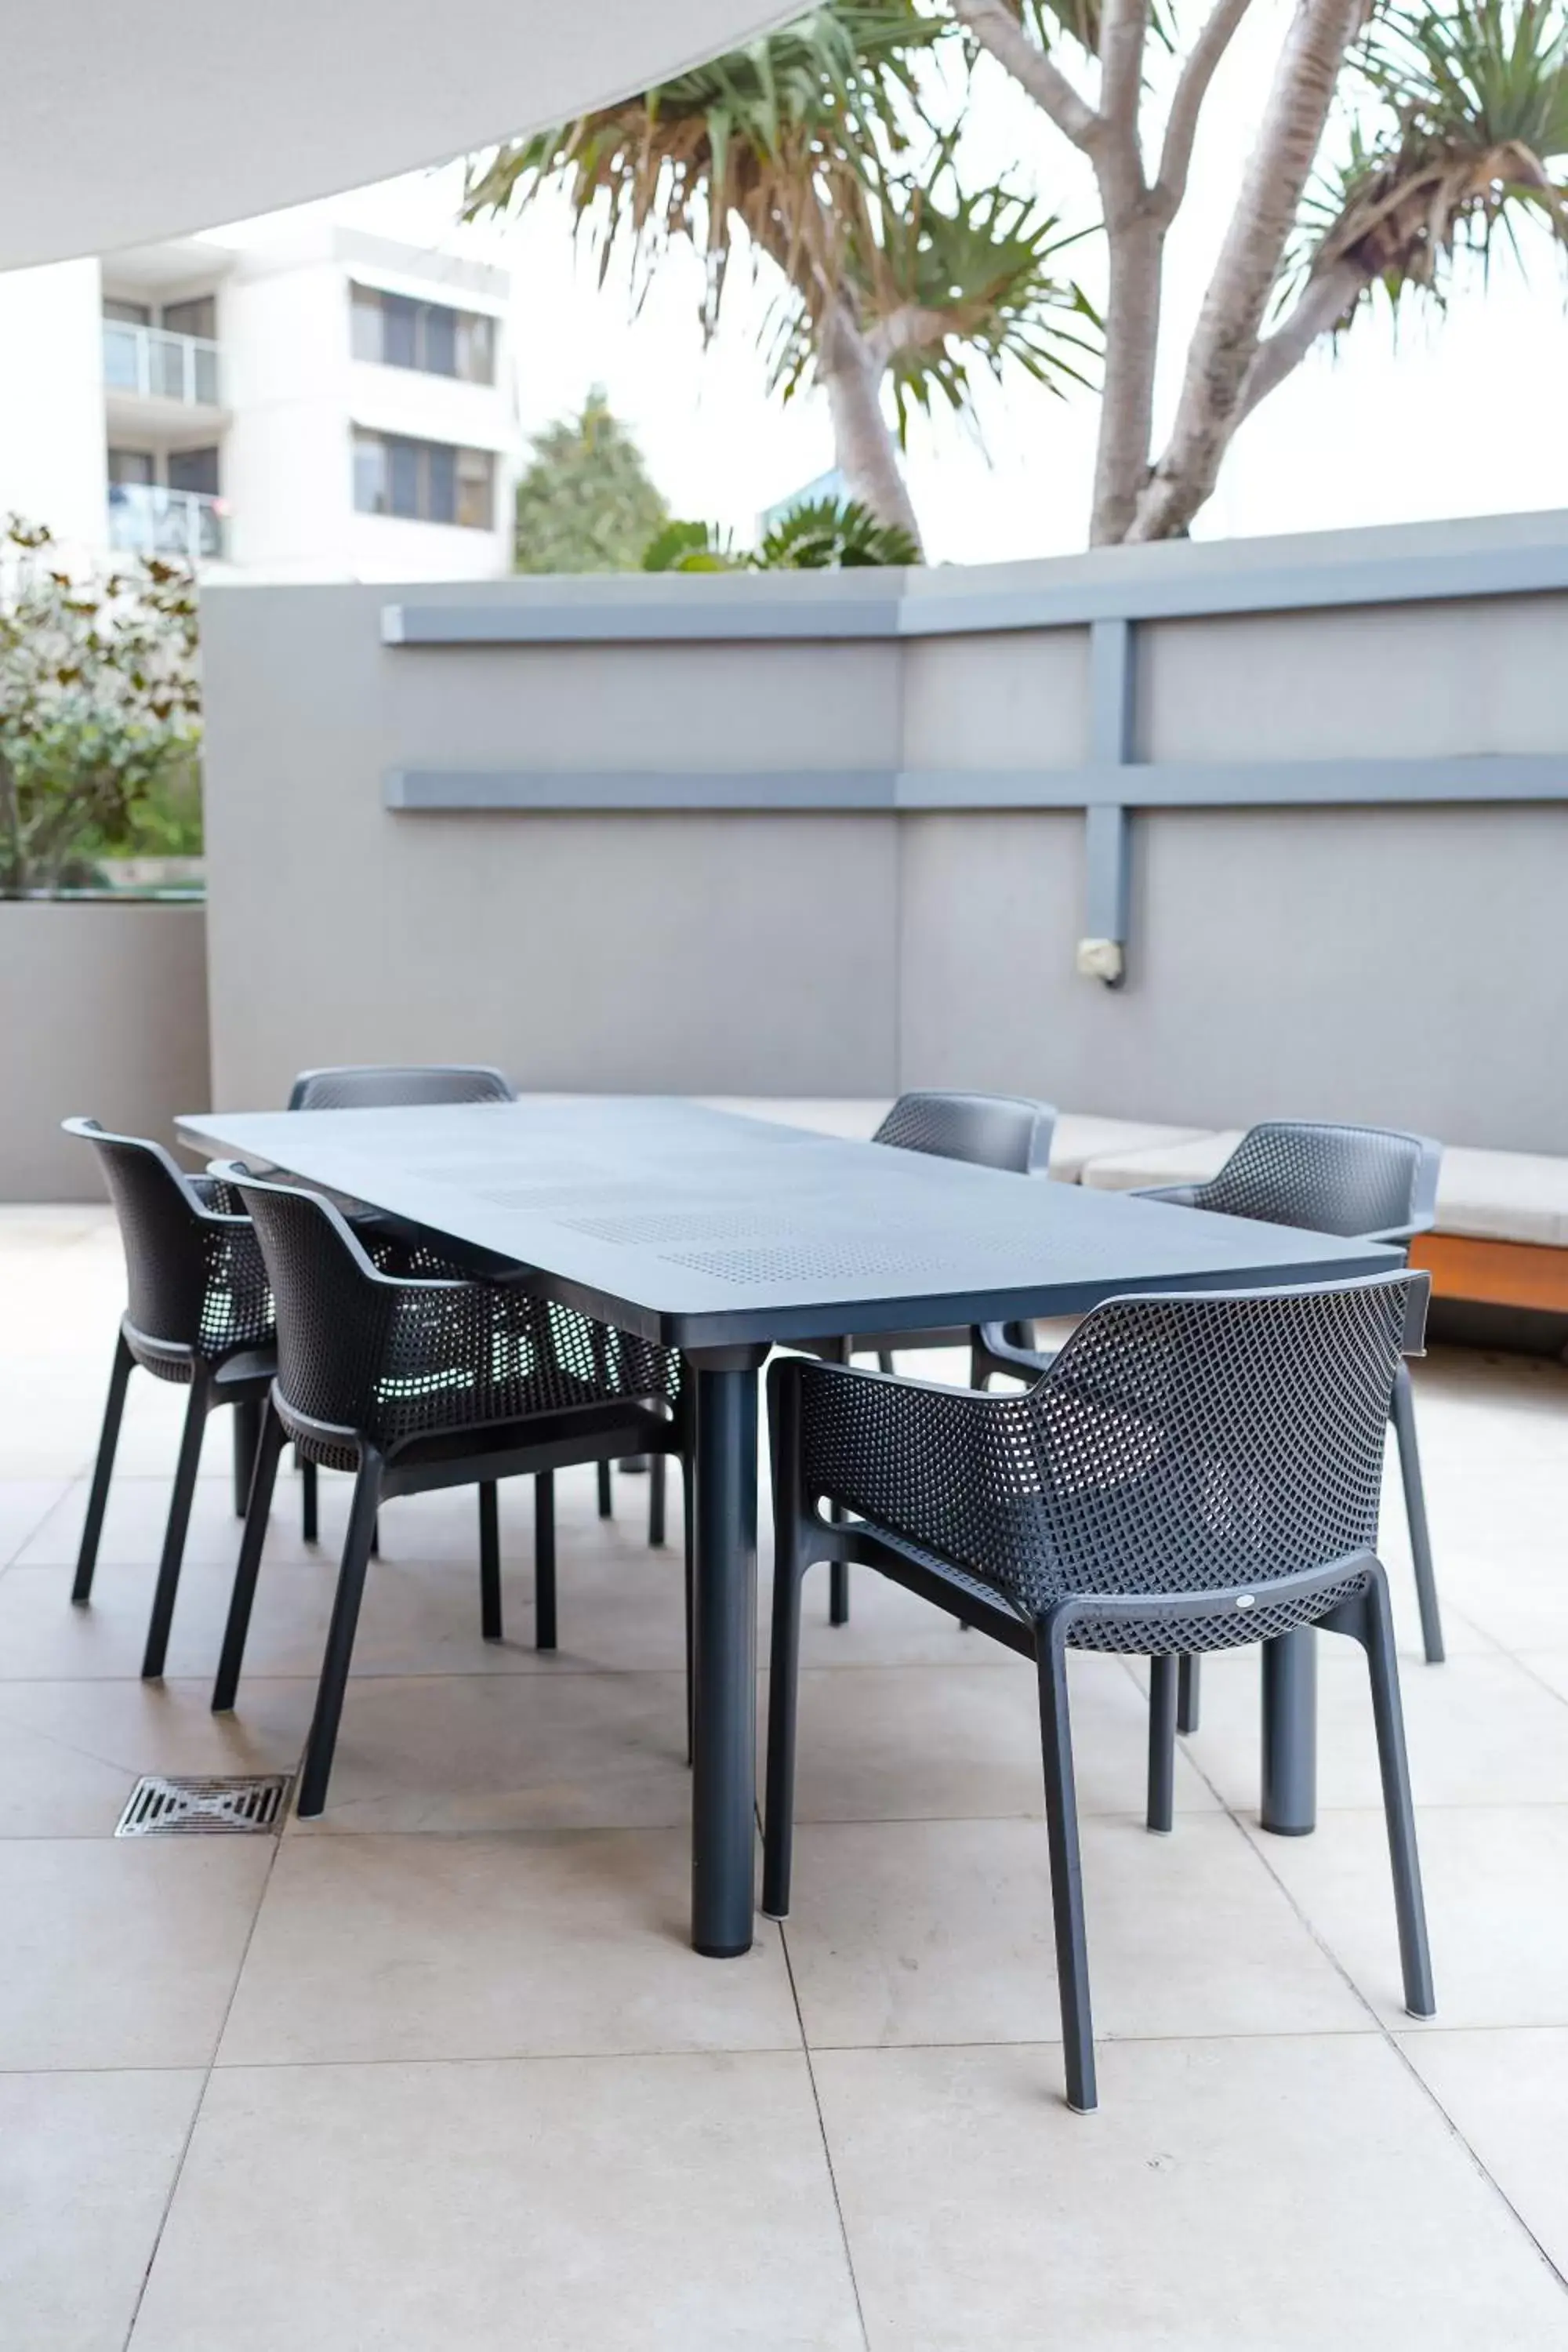 Balcony/Terrace in Breeze Mooloolaba, Ascend Hotel Collection